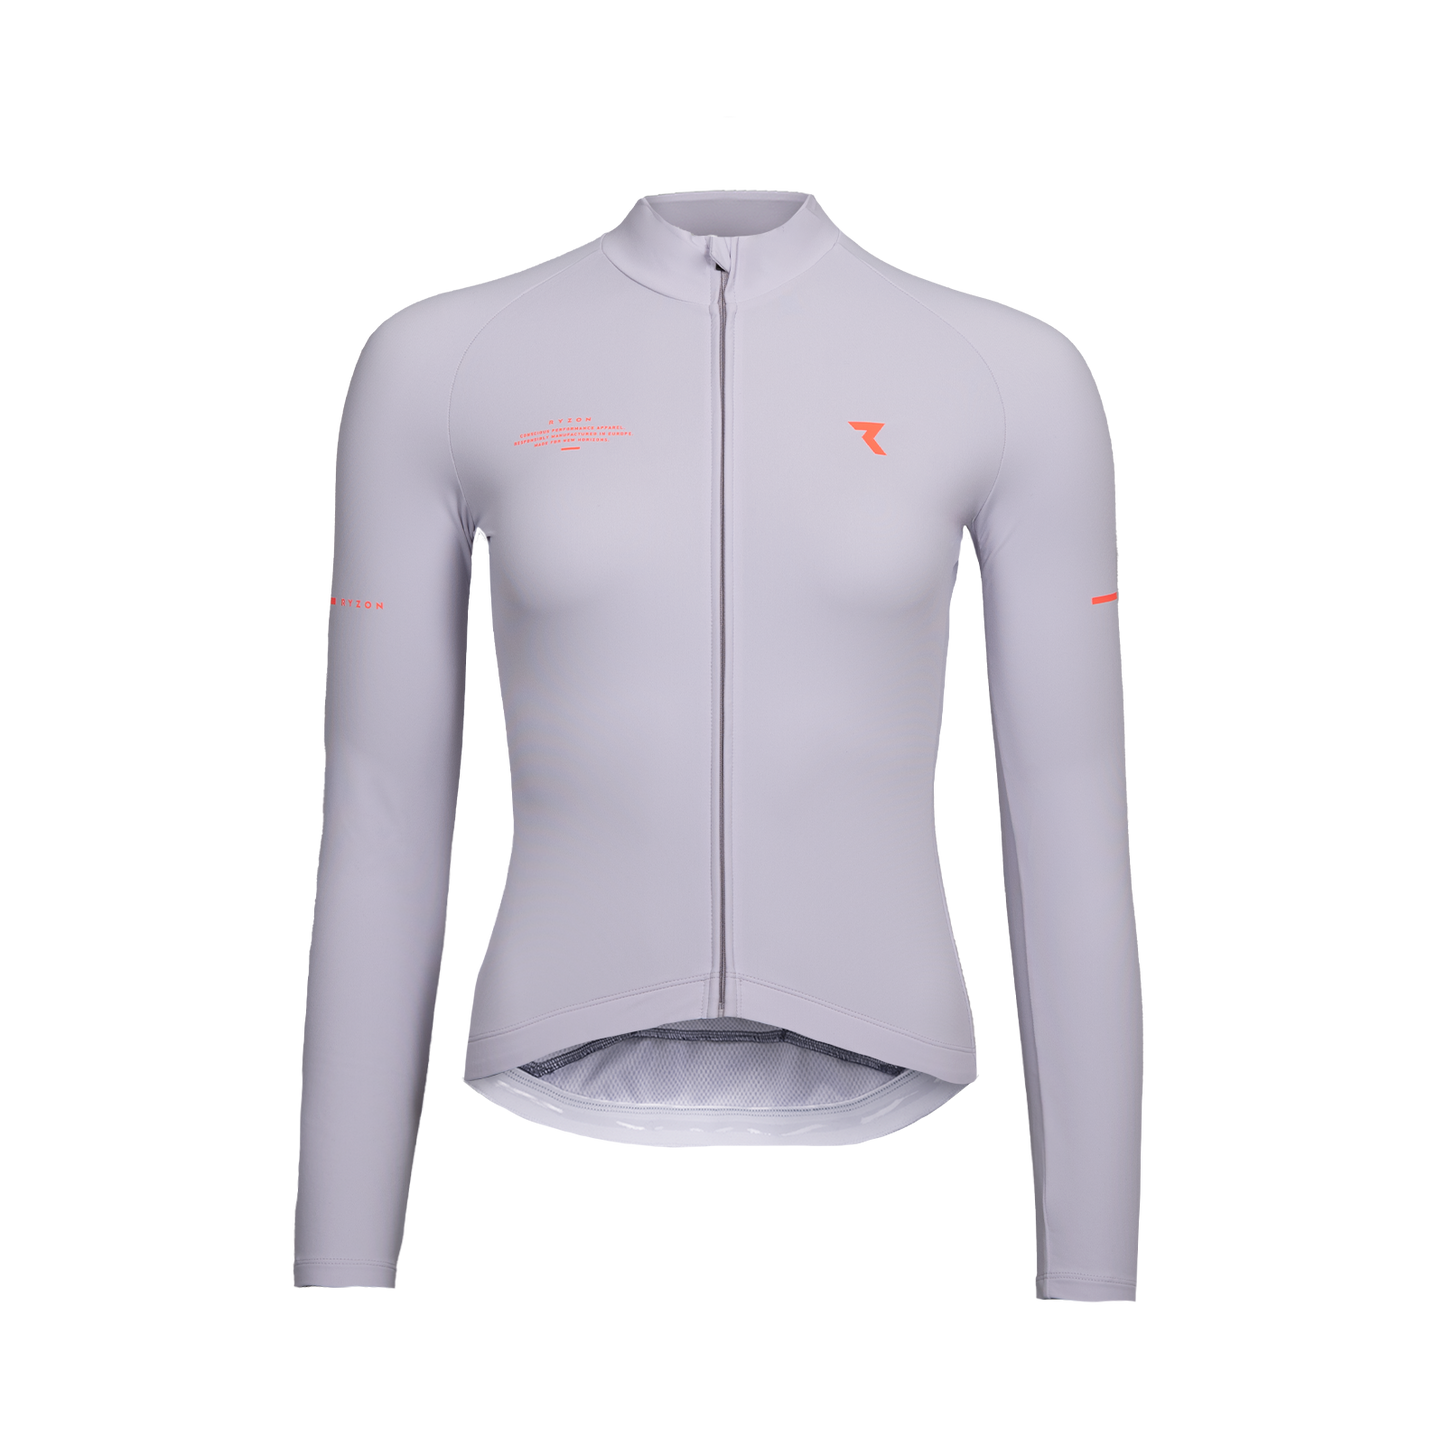 Women's long sleeve cycling jerseys - 15% Off with Newsletter Signup